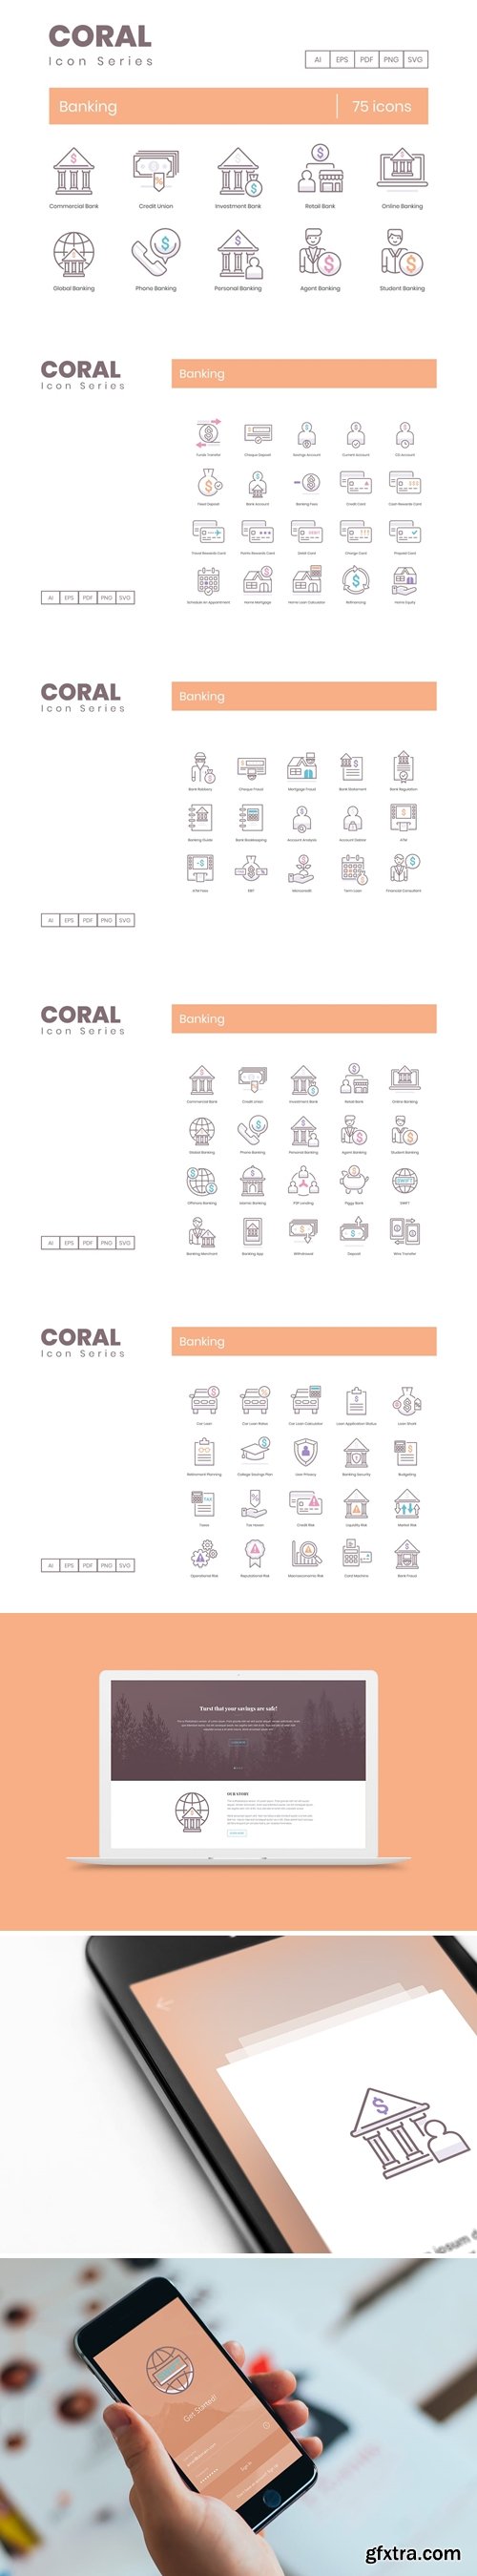 75 Banking Icons - Coral Series